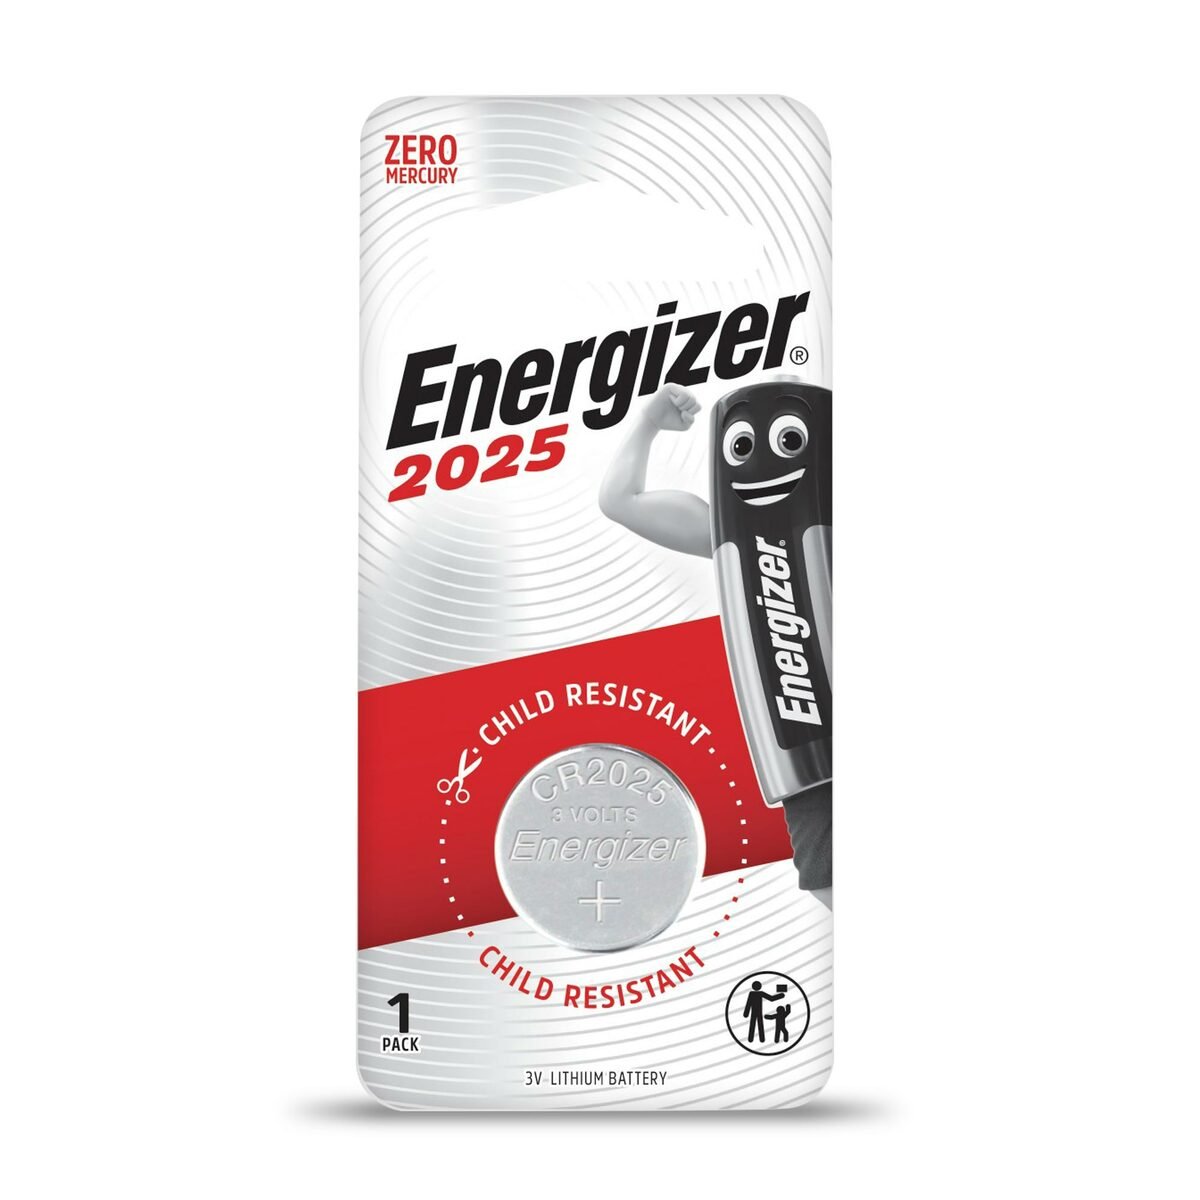 Energizer Lithium Battery CR2025 1pc